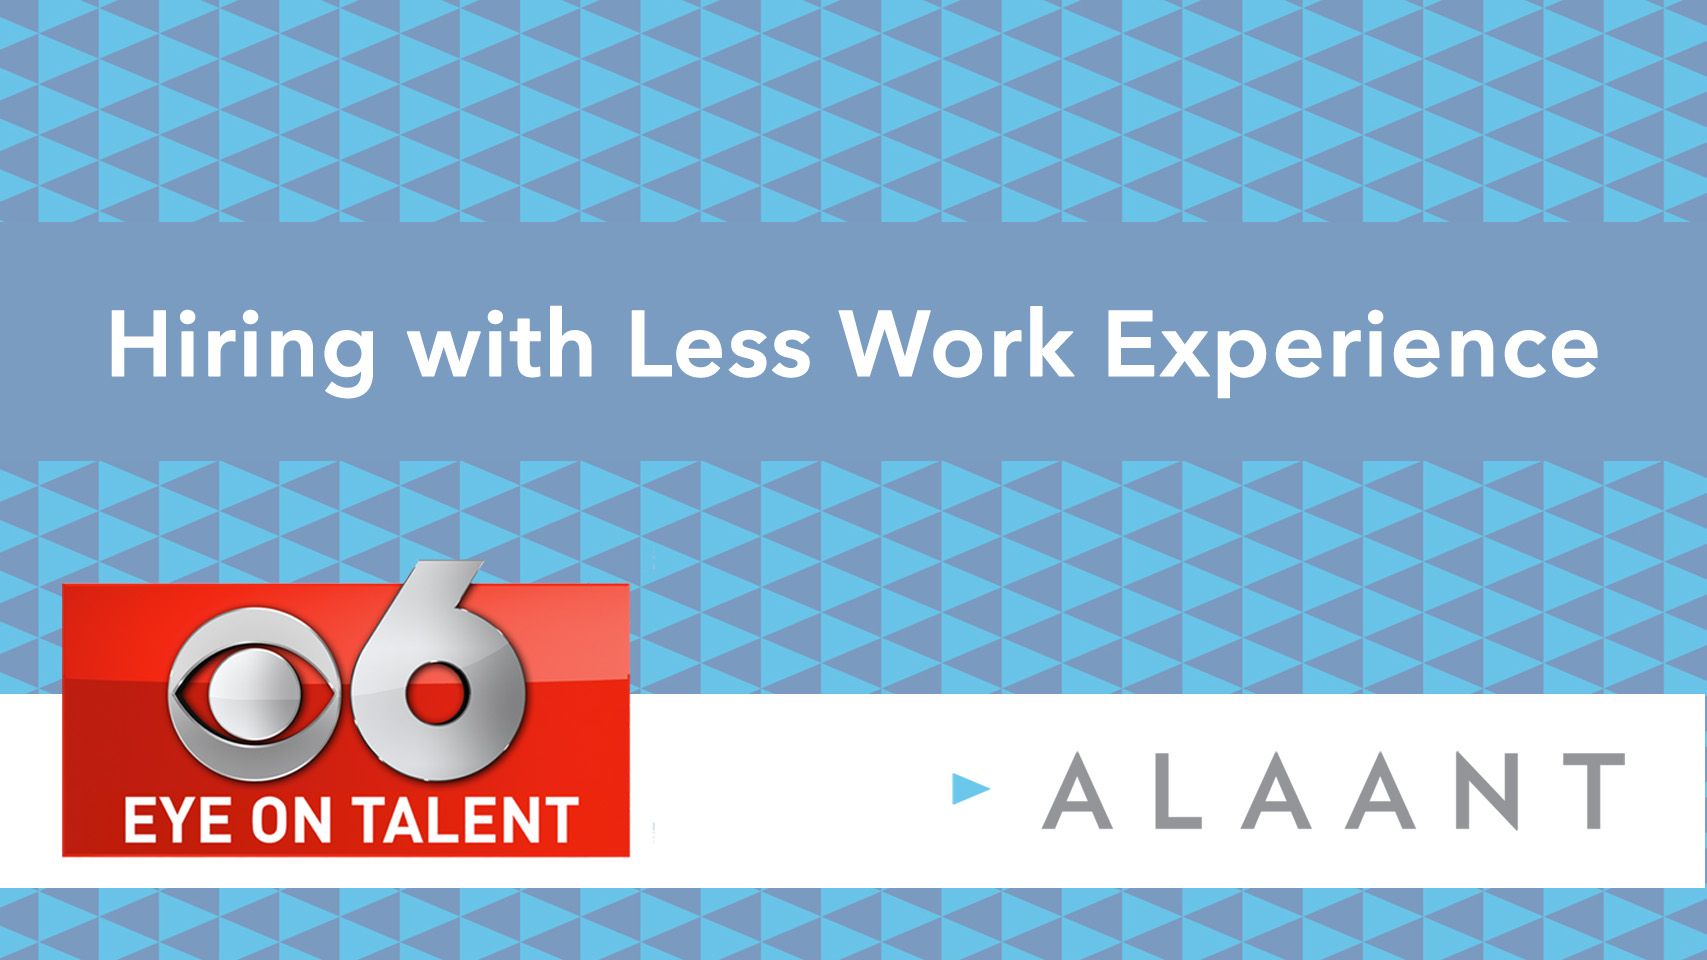 Alaant Eye on Talent Hiring with Less Work Experience